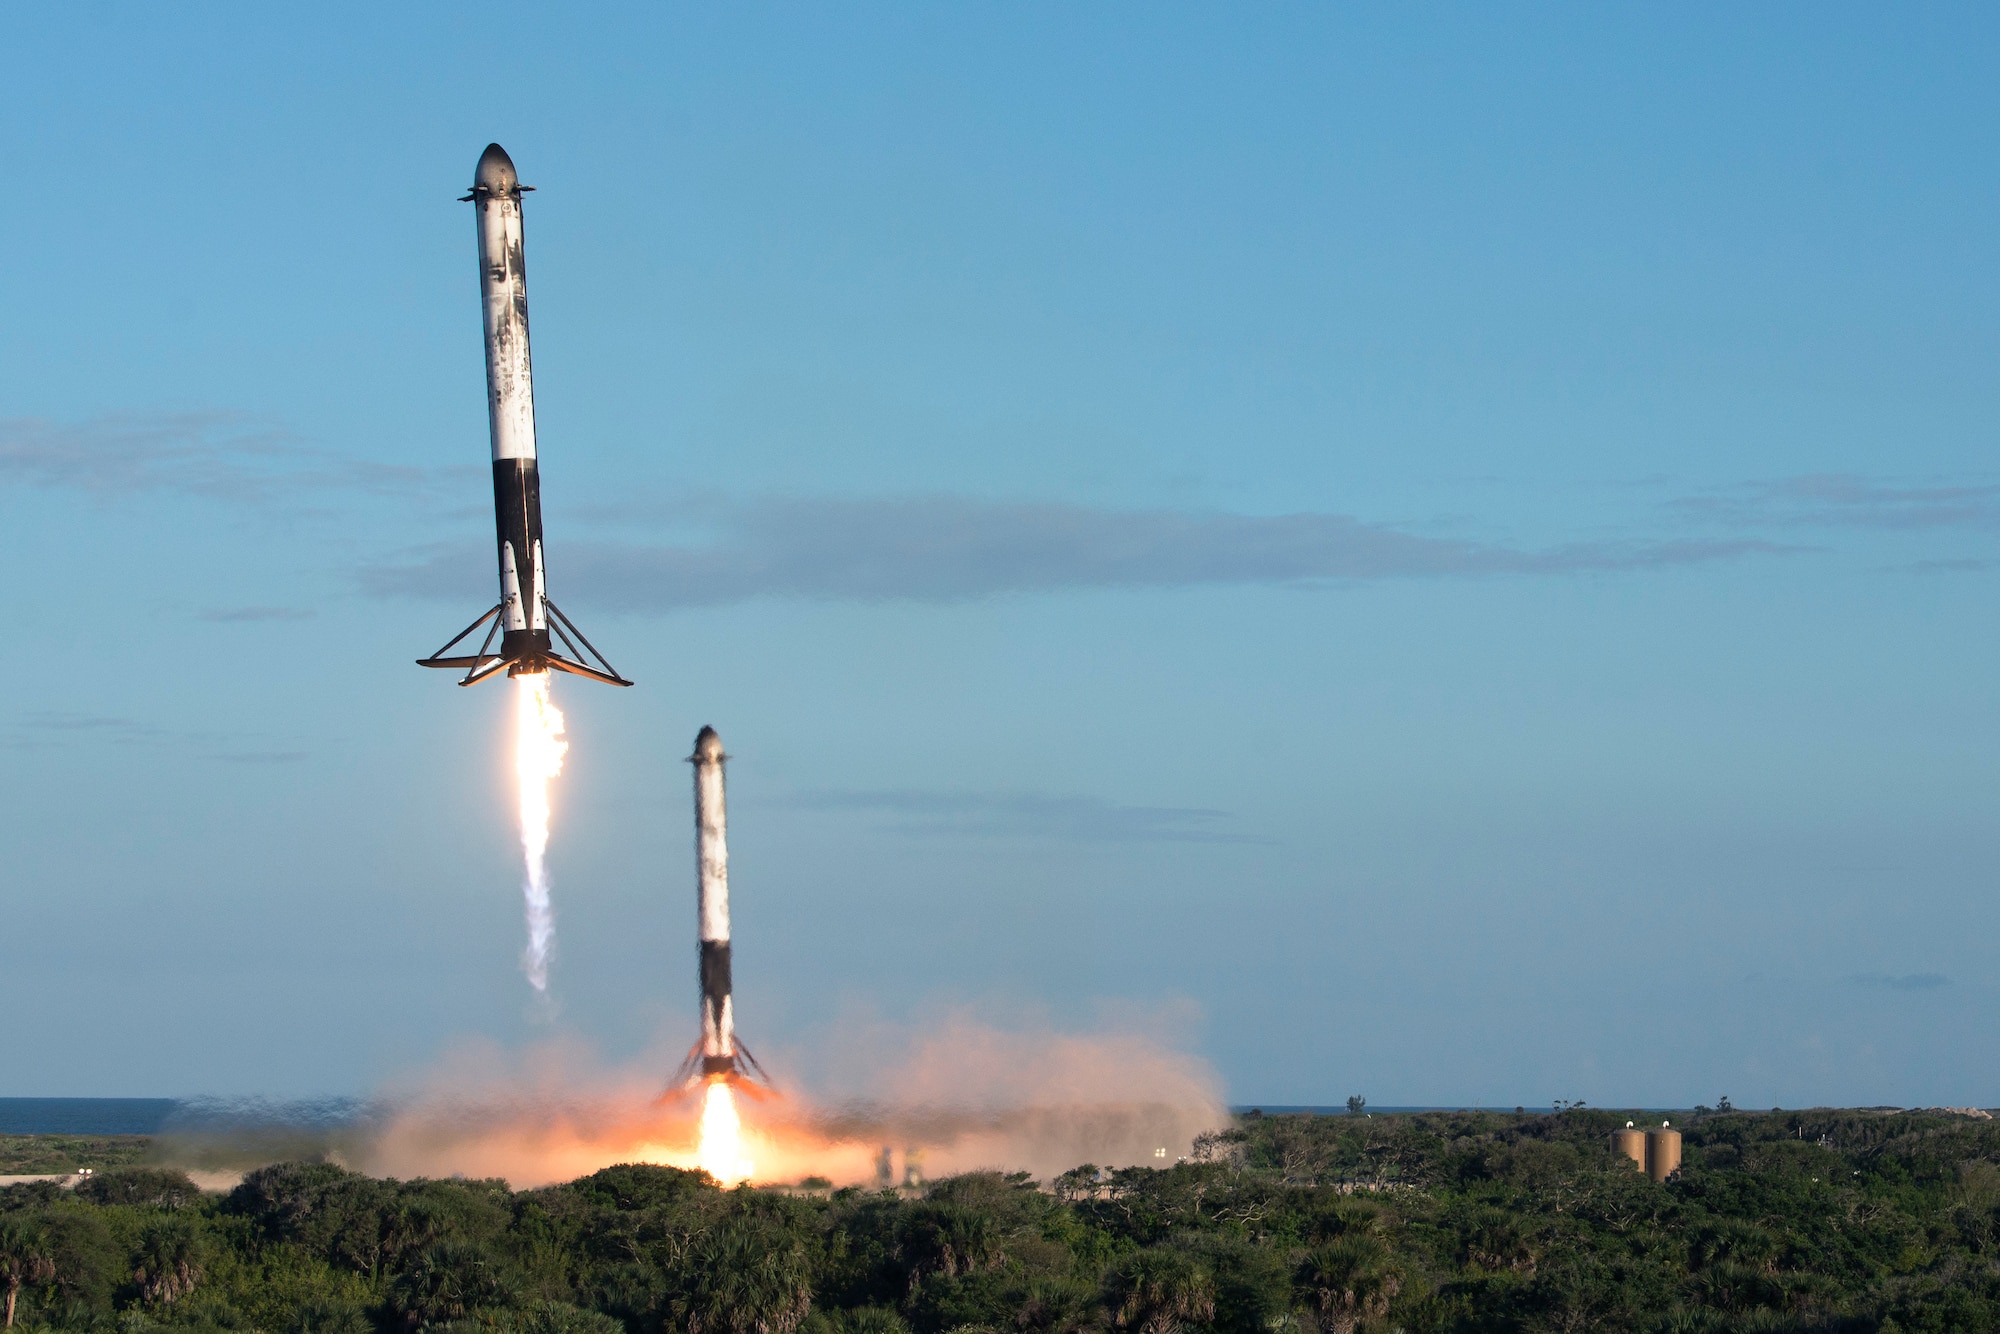 Two reusable rocket boosters land after the successful launch of SpaceX's Falcon Heavy Arabsat 6A